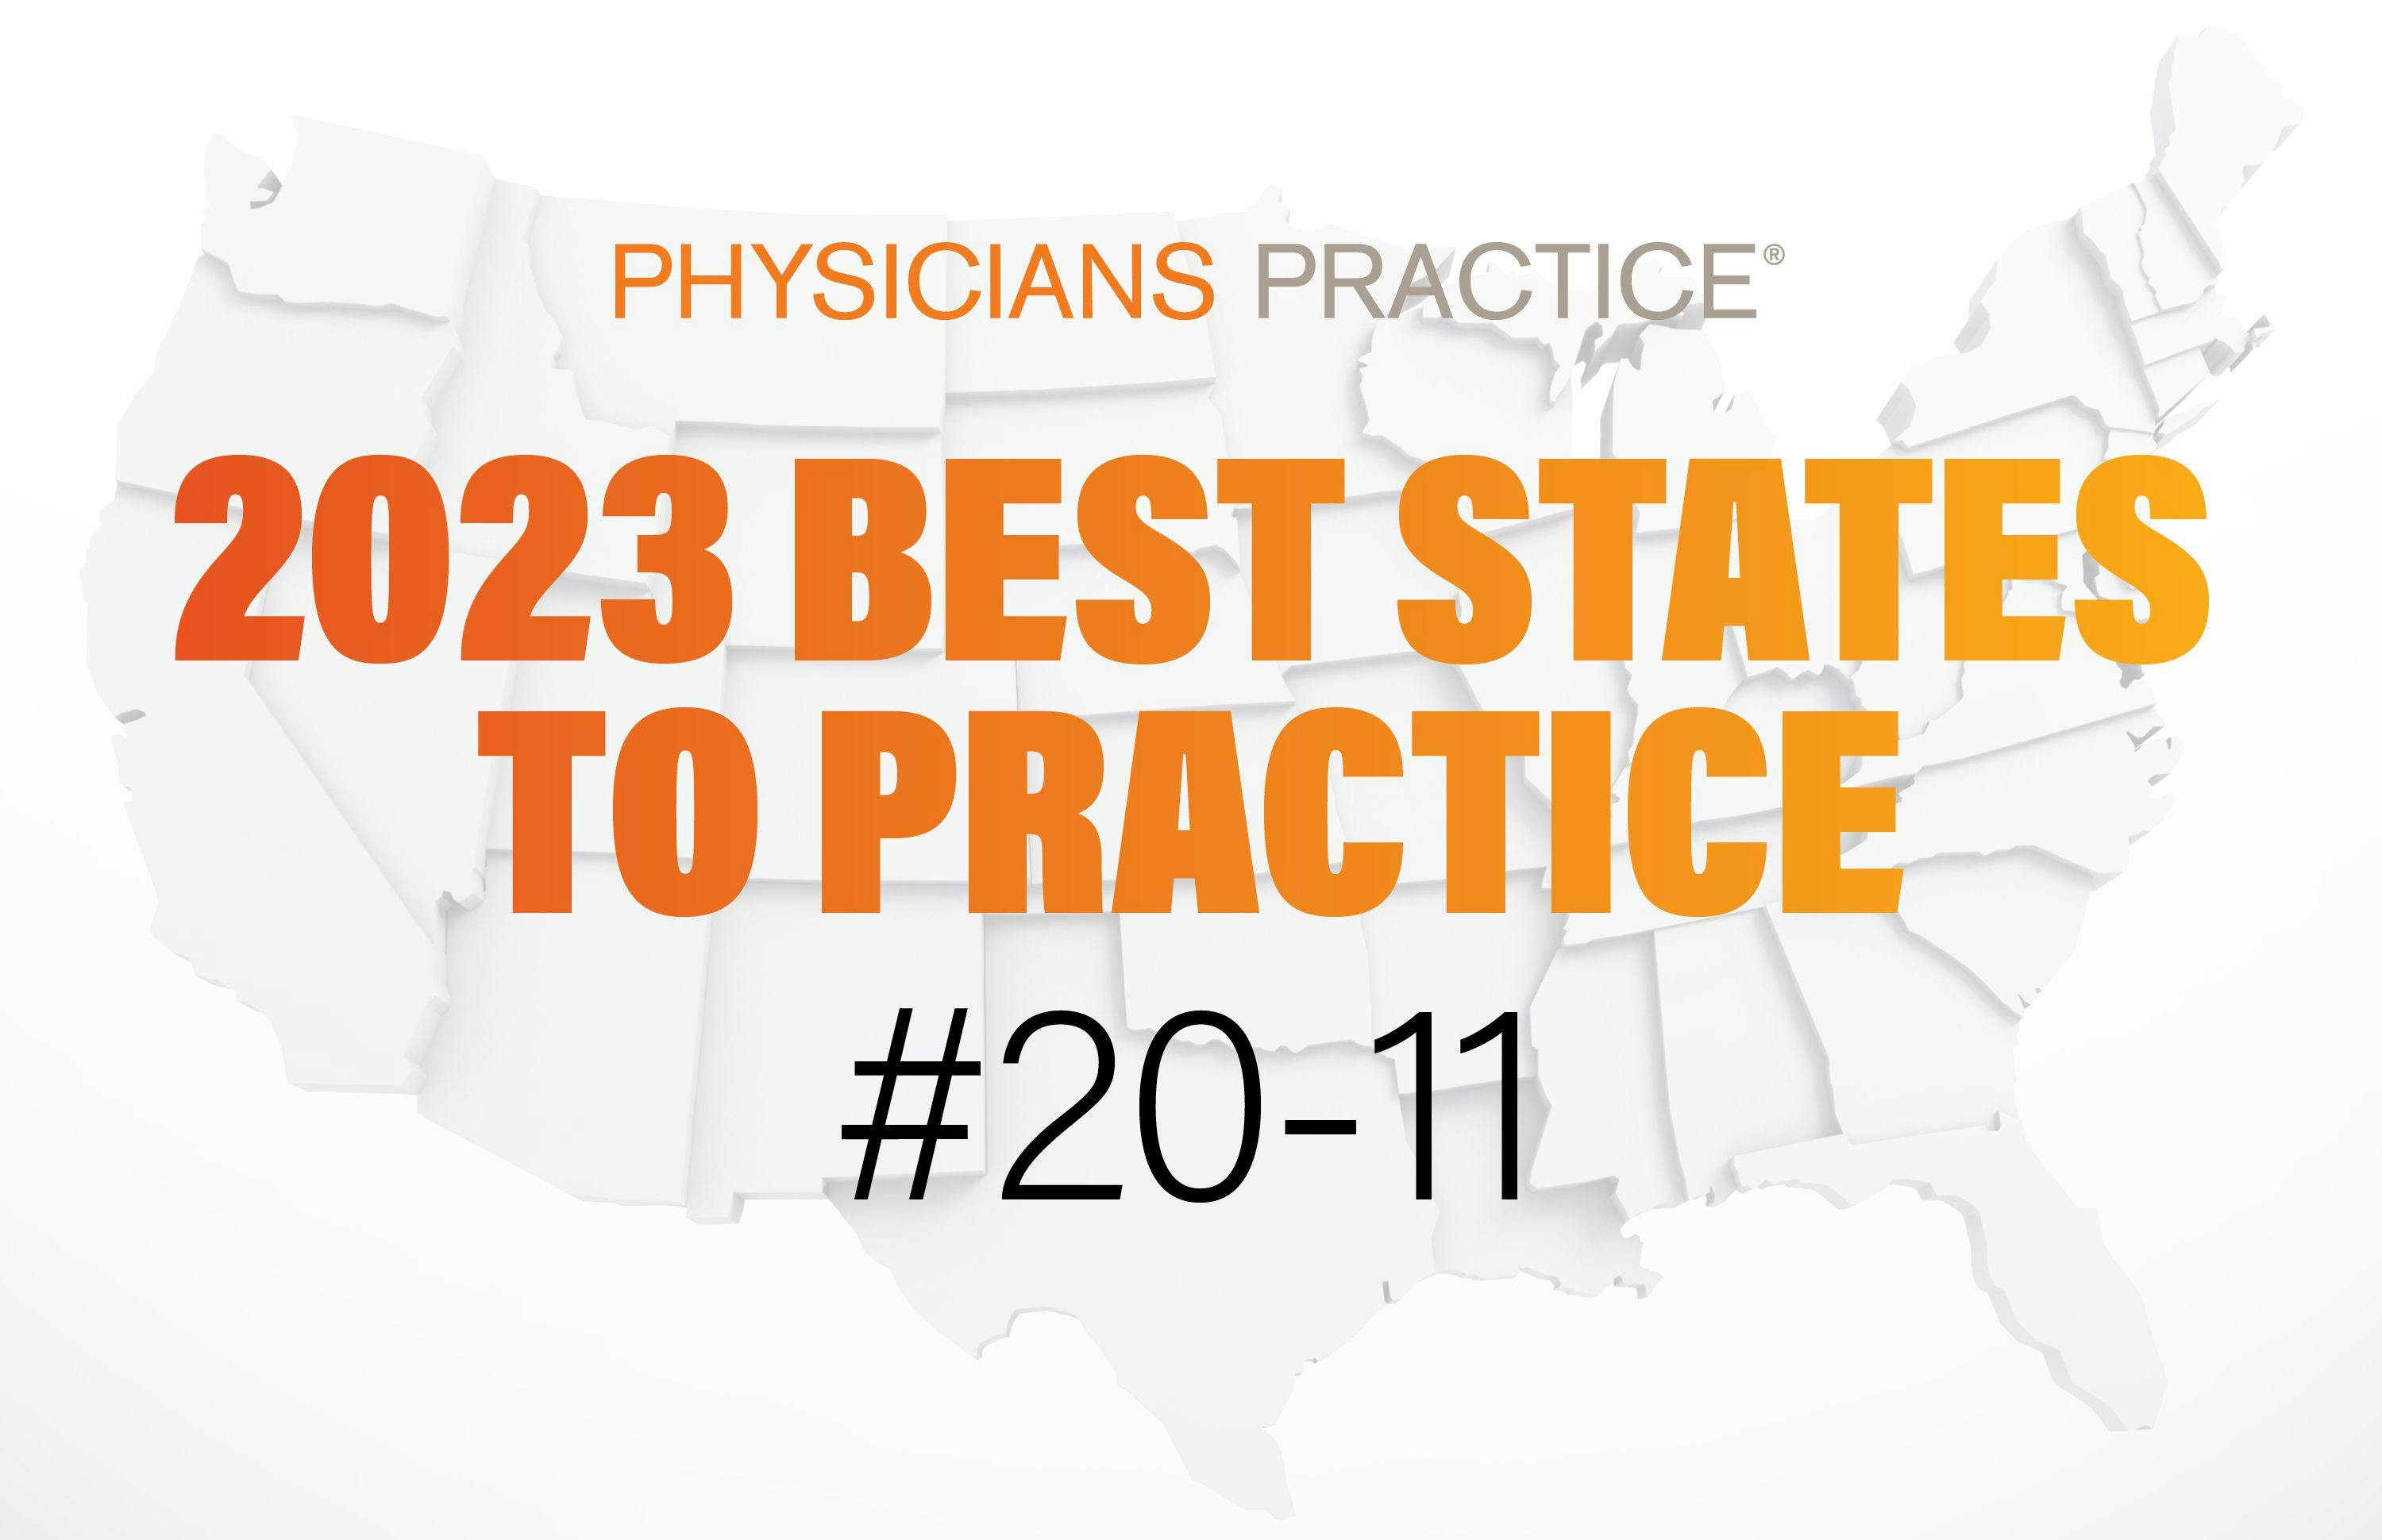 2023 Physicians Practice best states to practice: 20-11